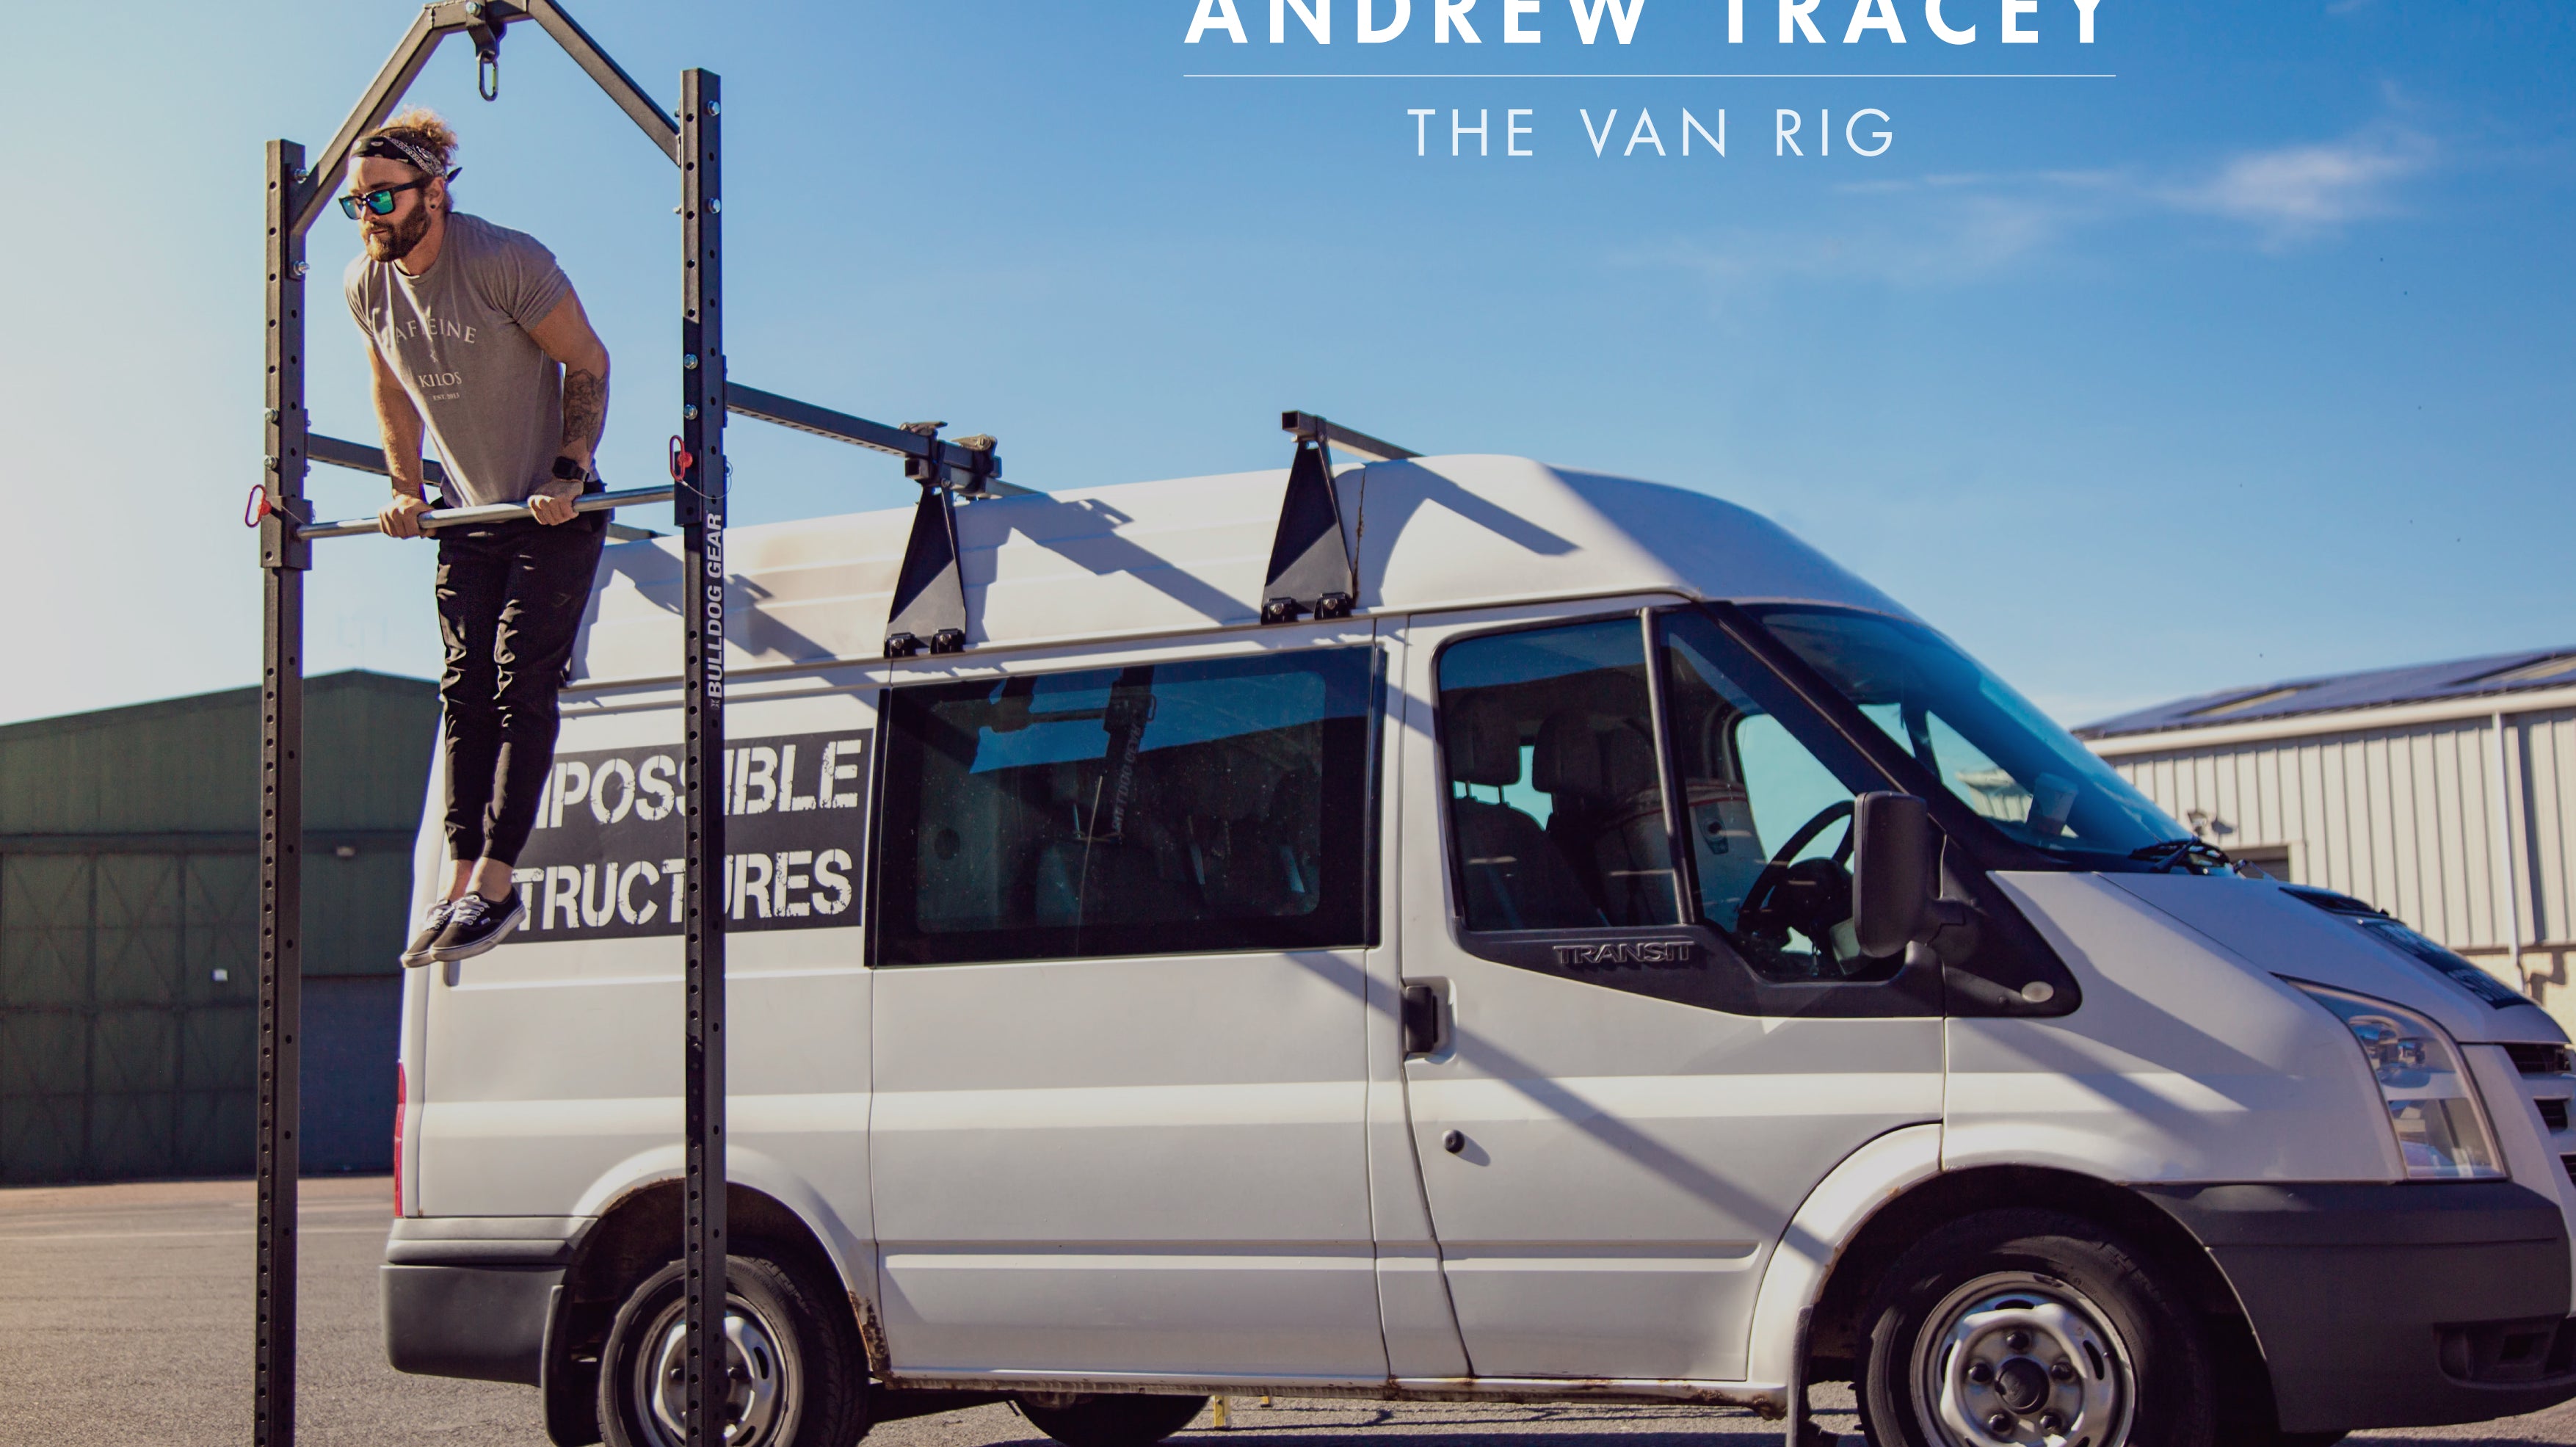 ANDREW TRACEY: The Van Rig